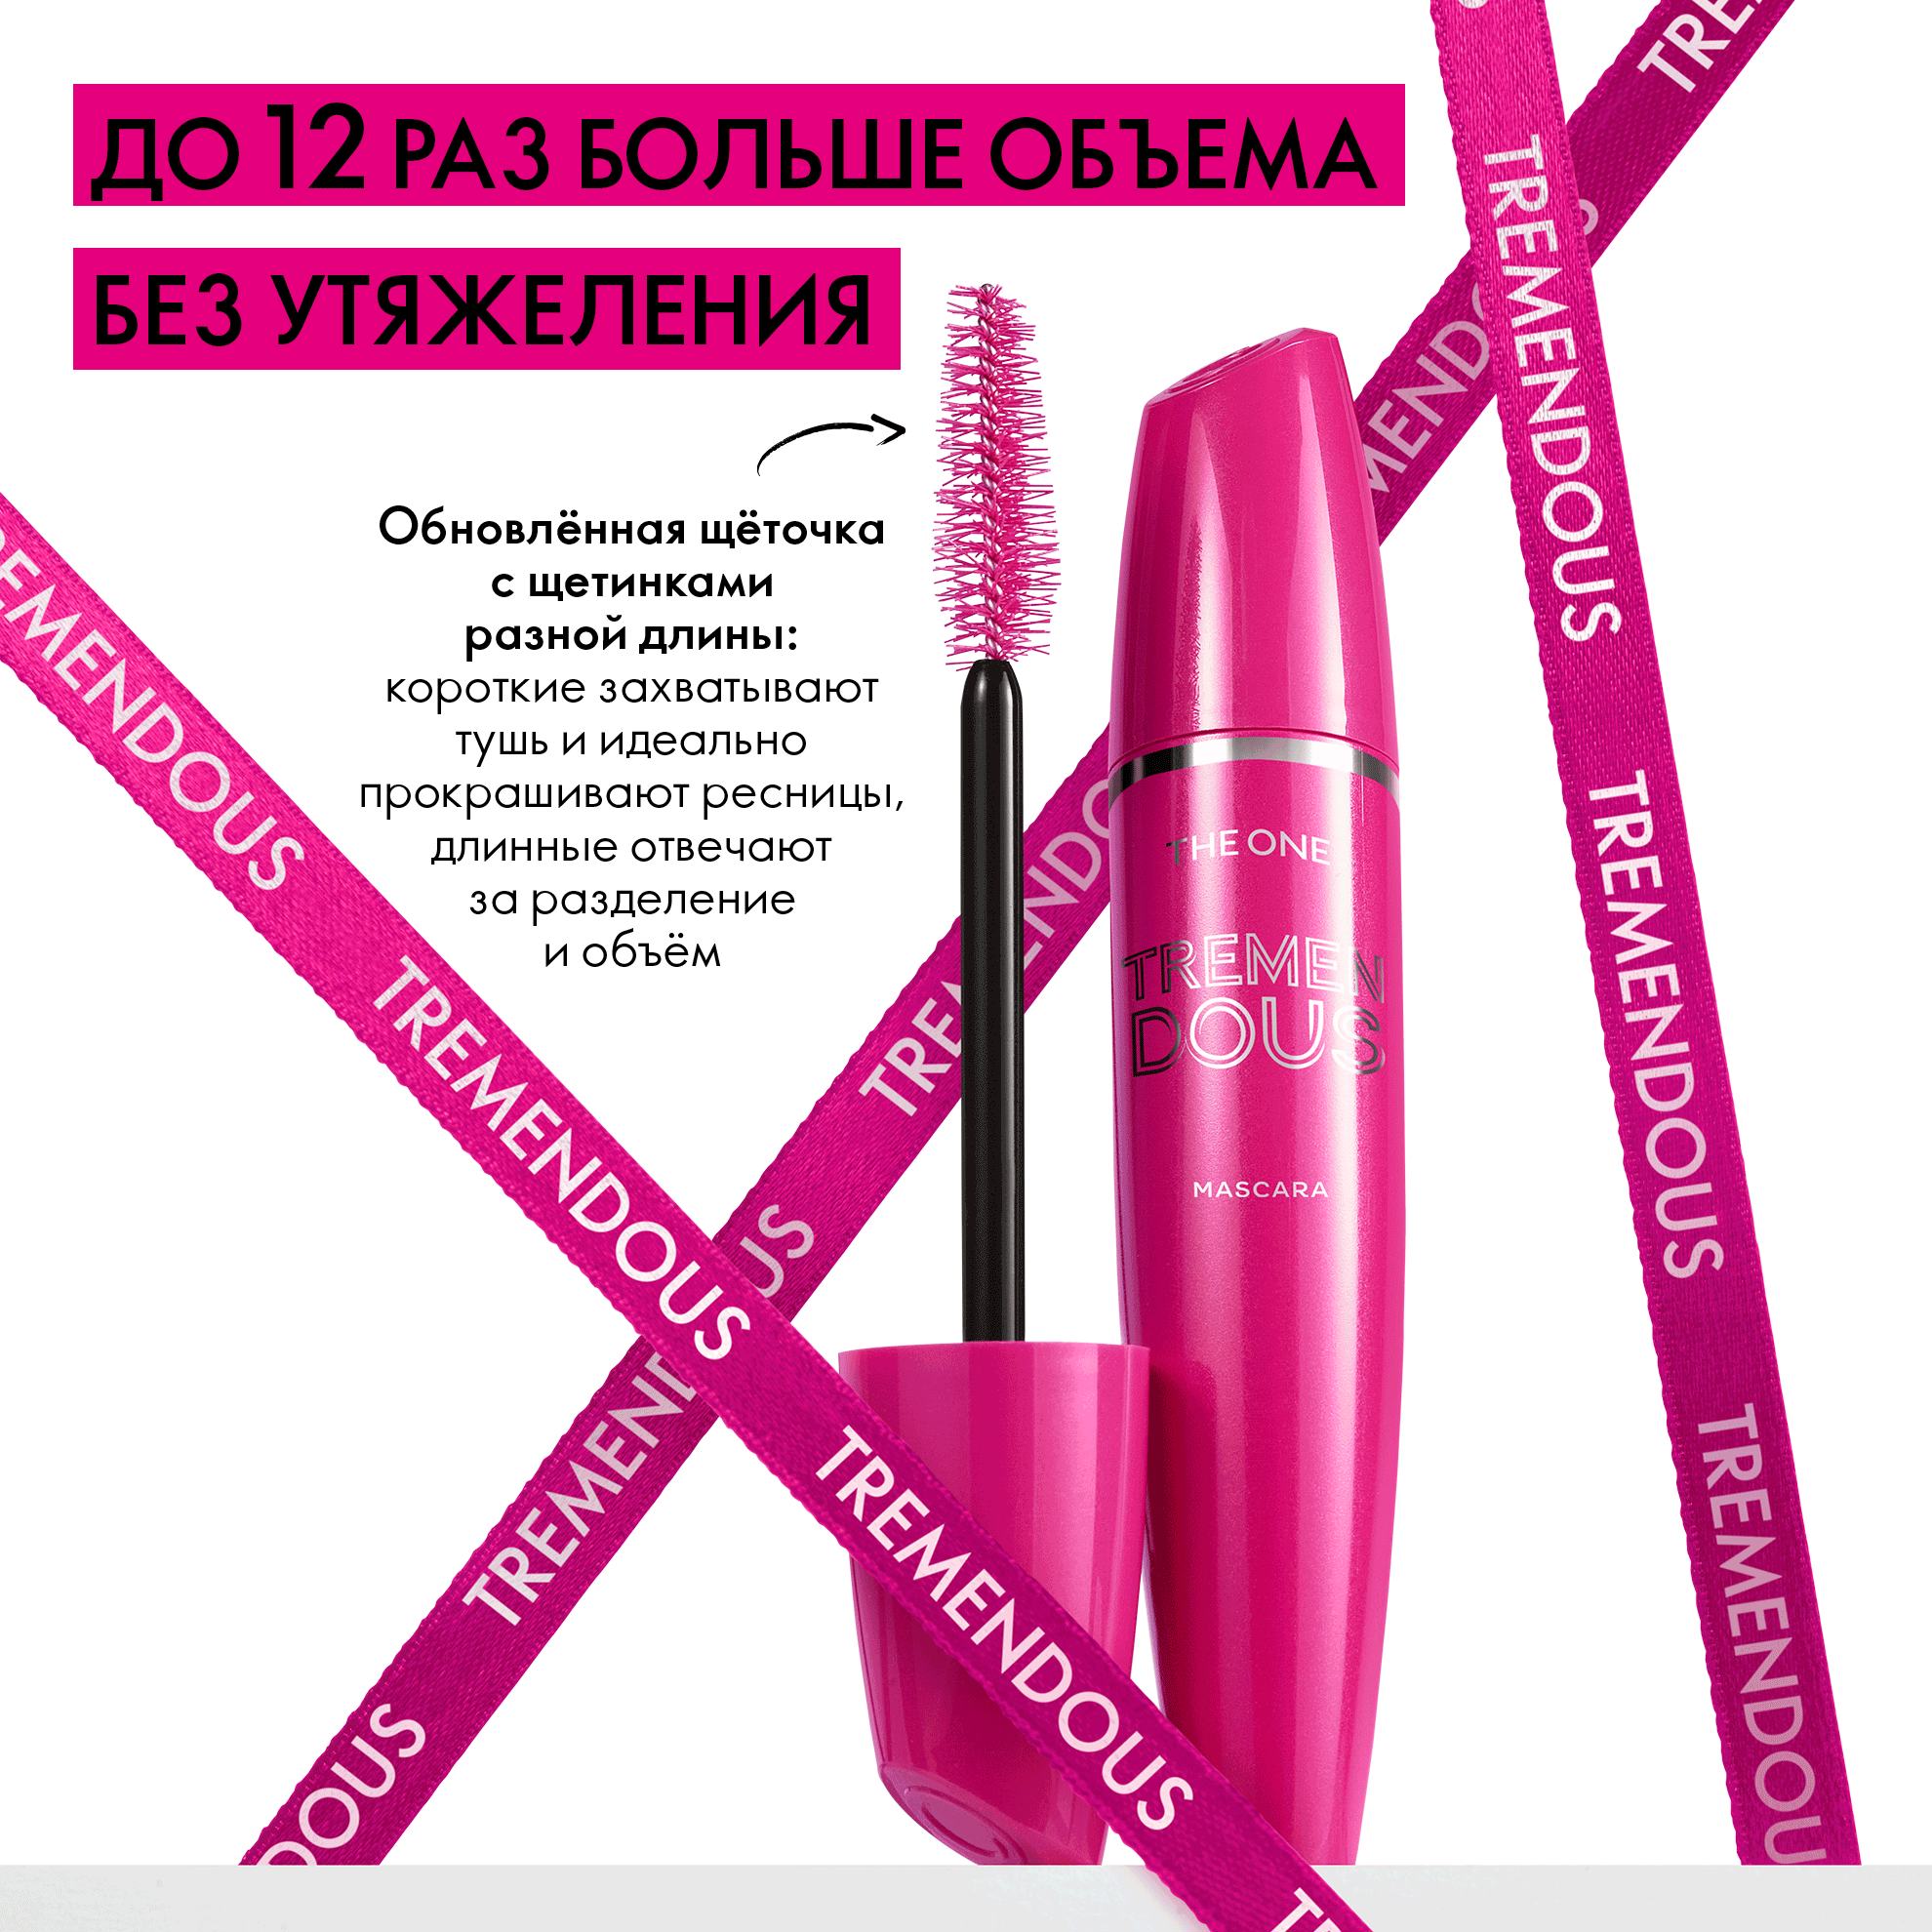 https://media-cdn.oriflame.com/productImage?externalMediaId=product-management-media%2fProducts%2f43135%2fBY%2f43135_5.png&id=2024-03-11T10-38-44-251Z_MediaMigration&version=1657098007